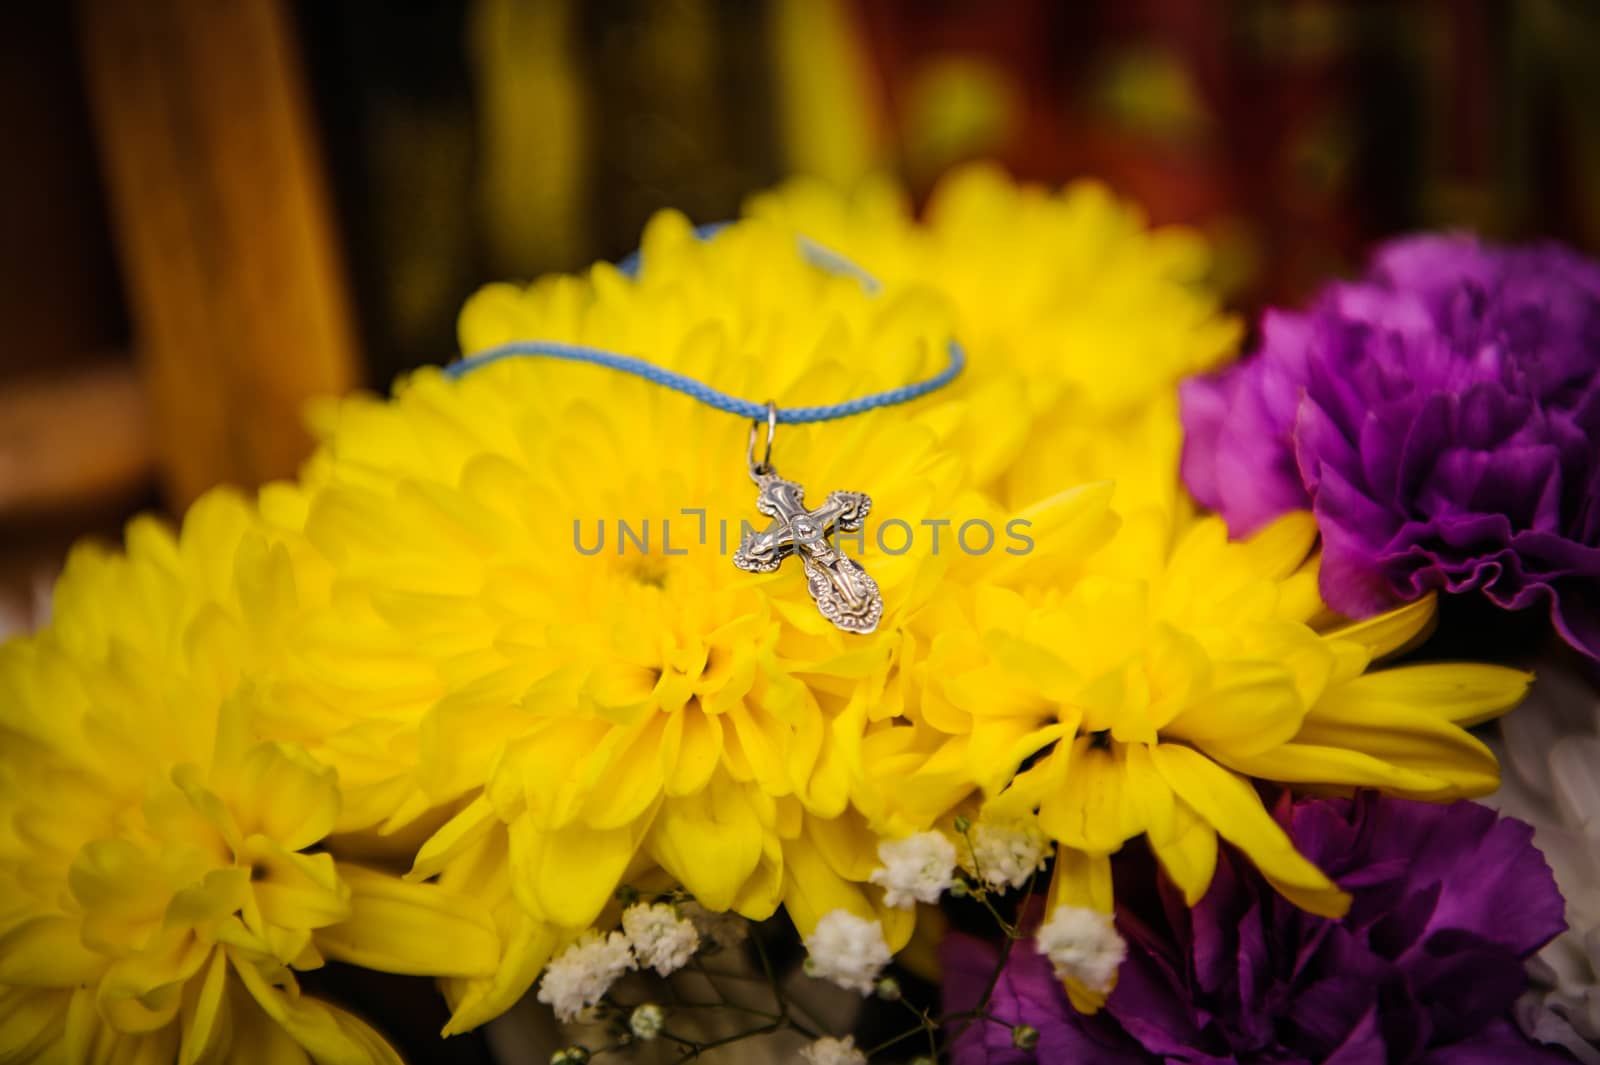 Orthodox cross lies on a background of yellow flowers